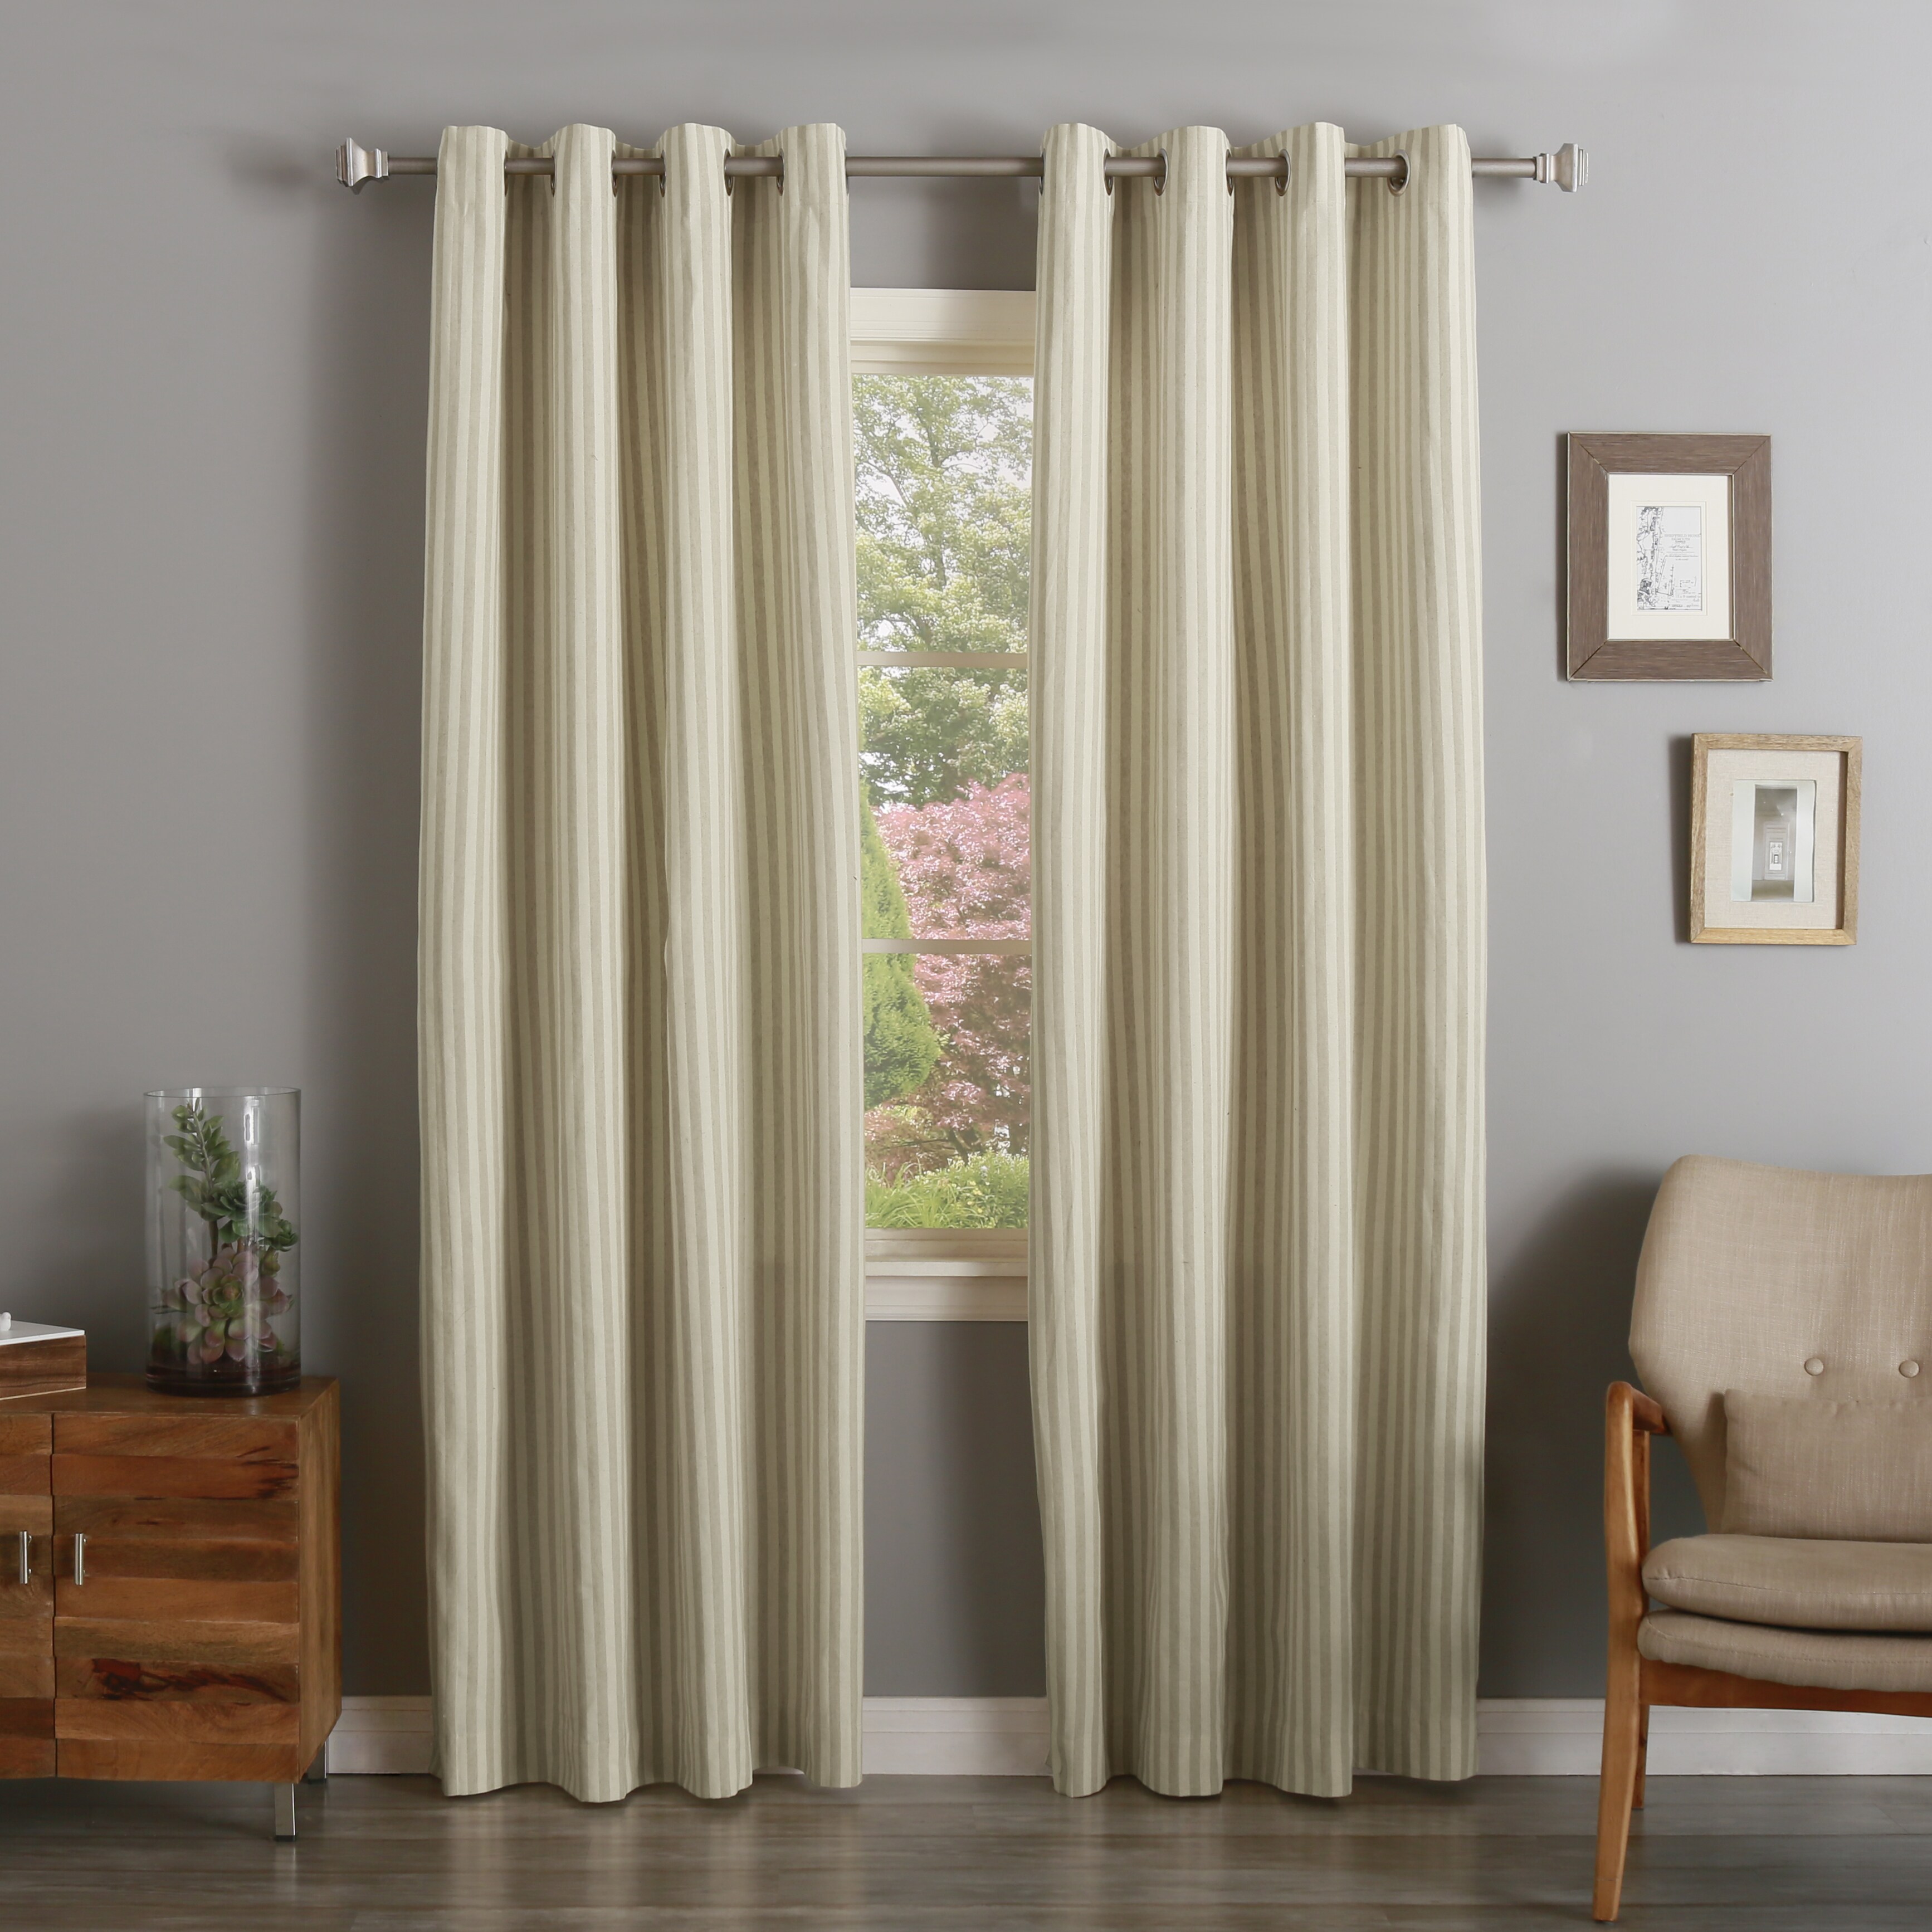 Awning Stripe Curtains | arielle-intoxication